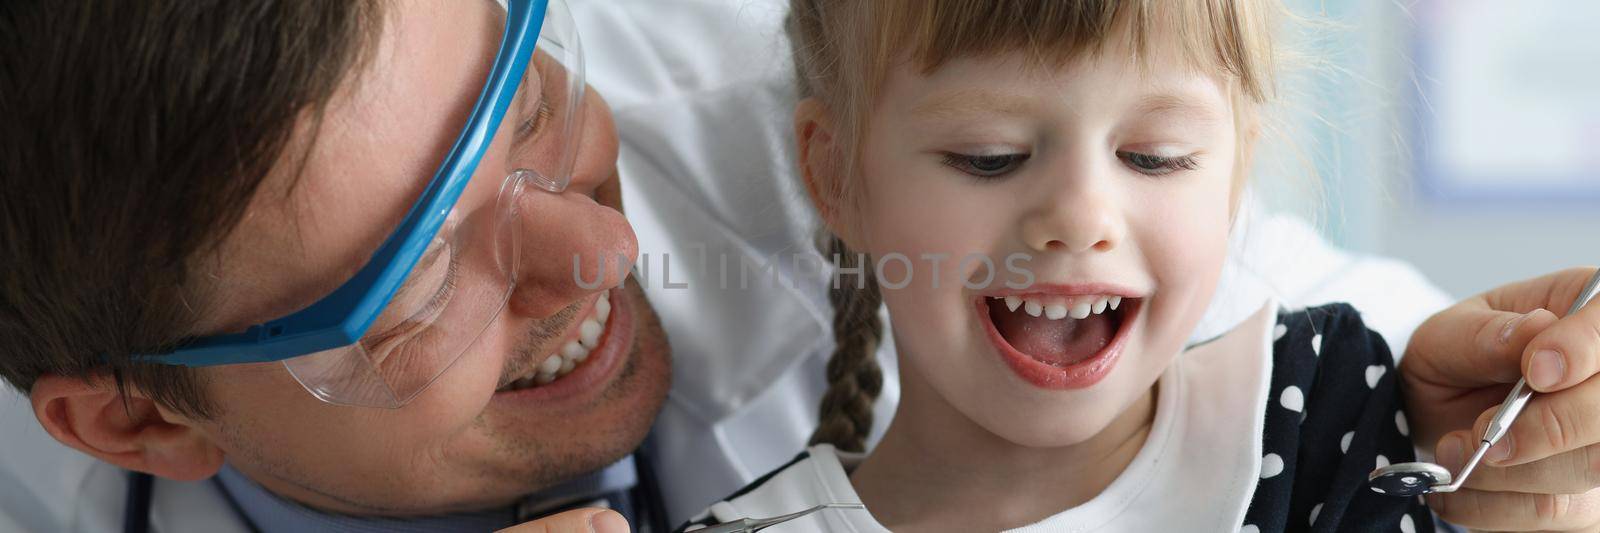 Man pediatrician check little girls health condition using special tool for mouth by kuprevich